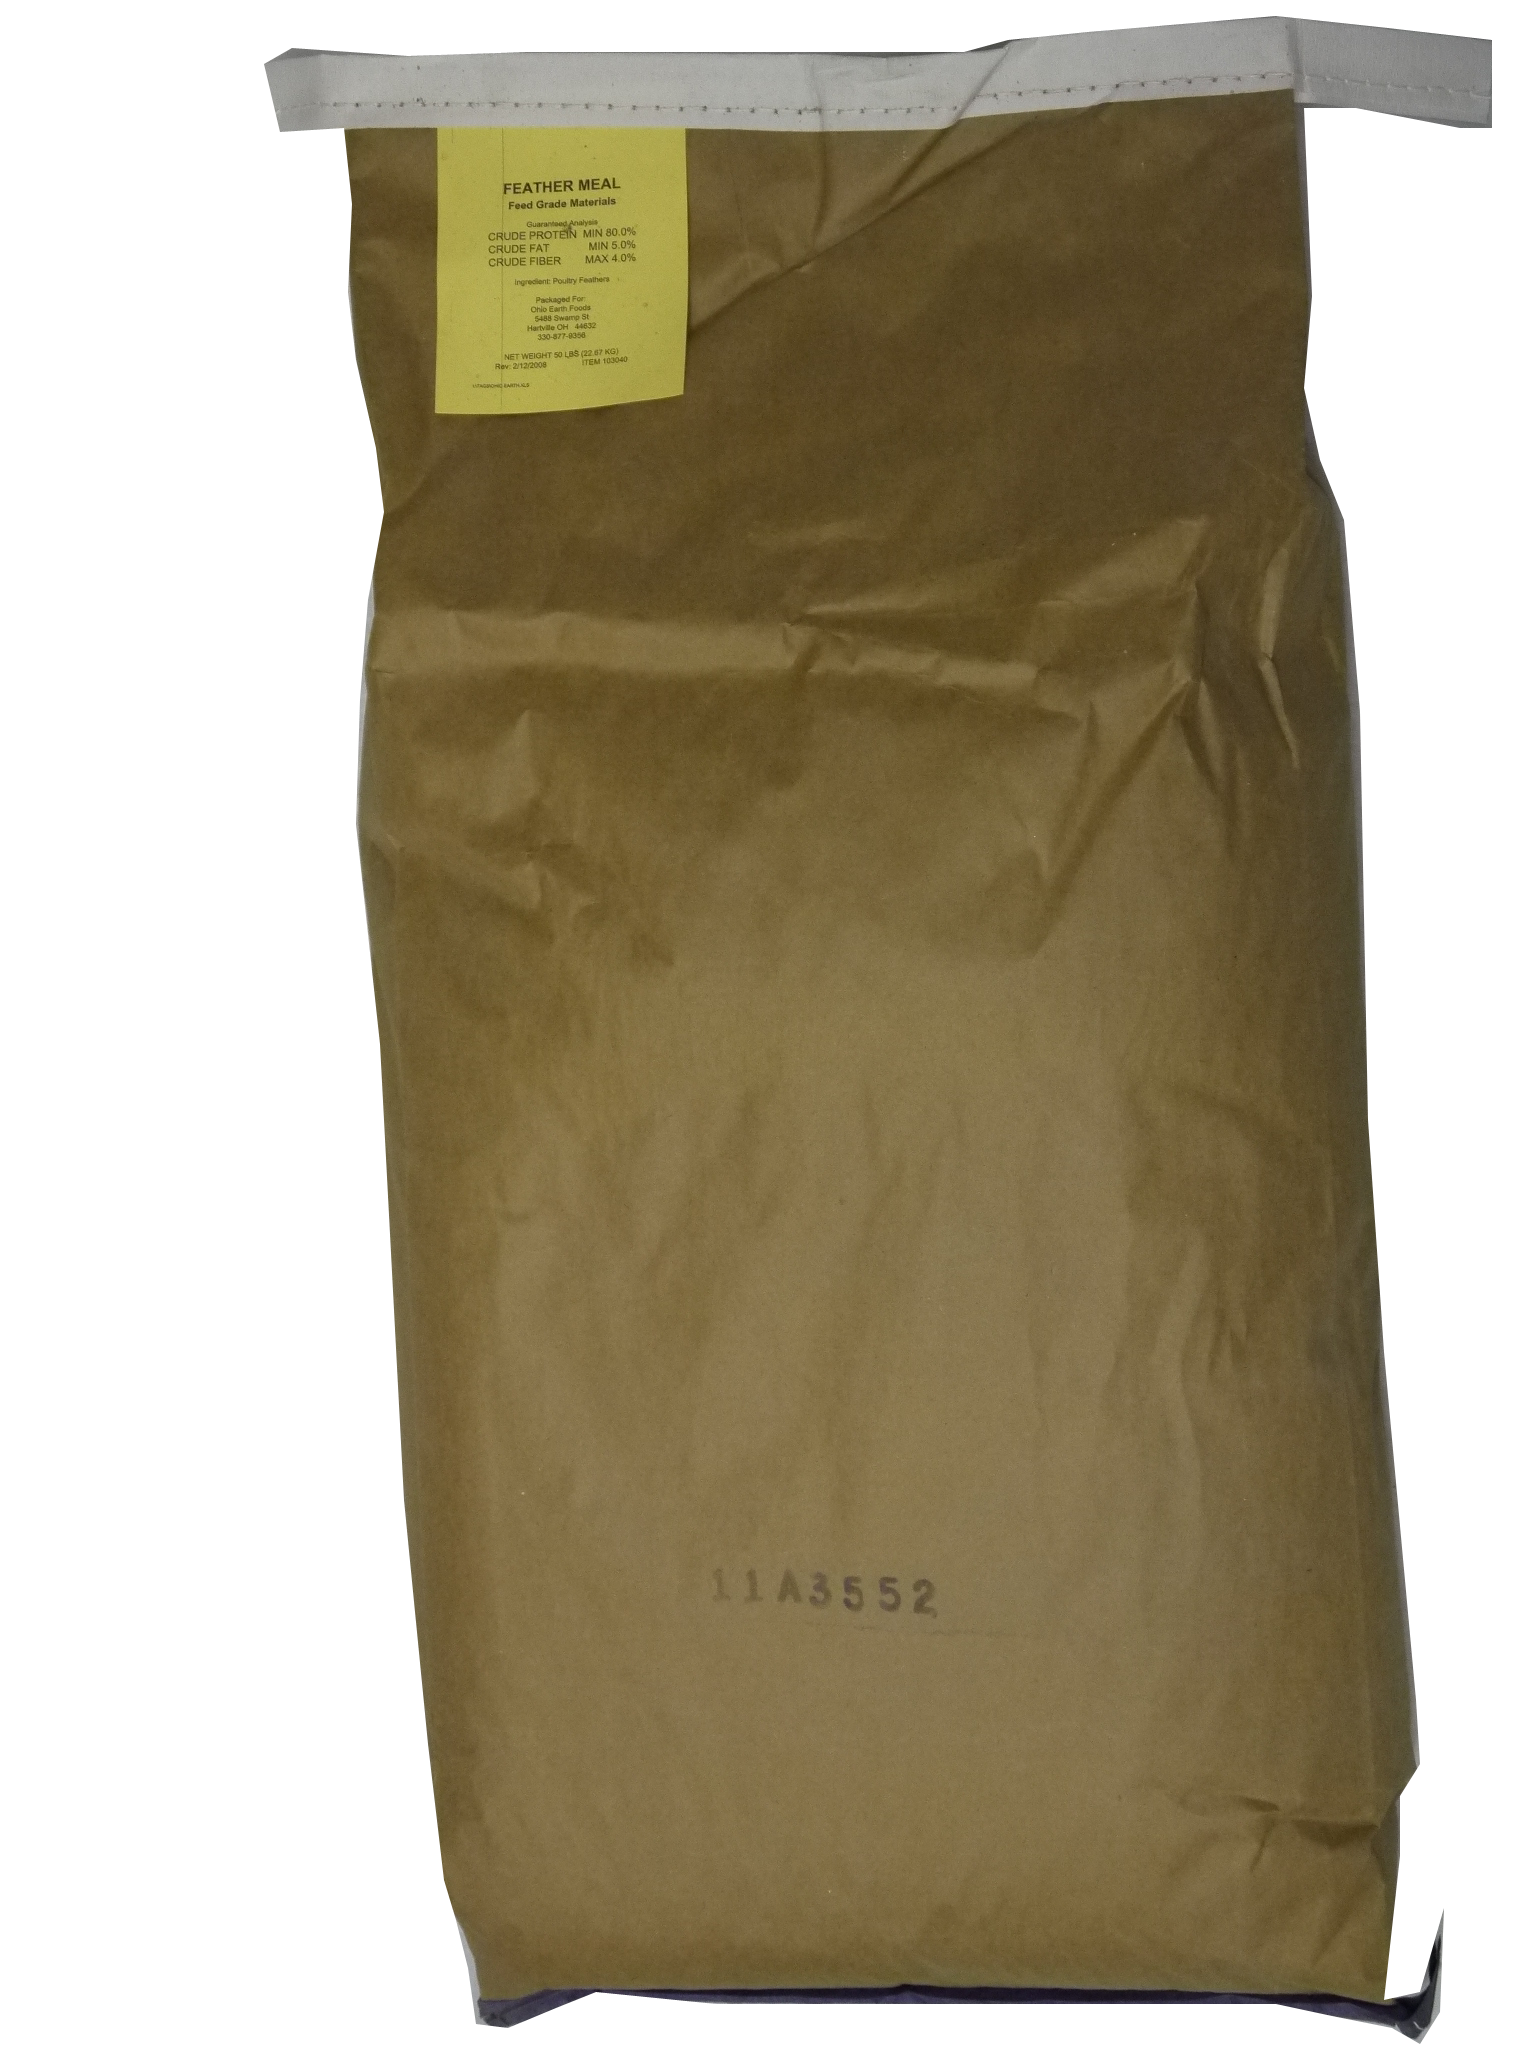 Feather Meal 50# bag